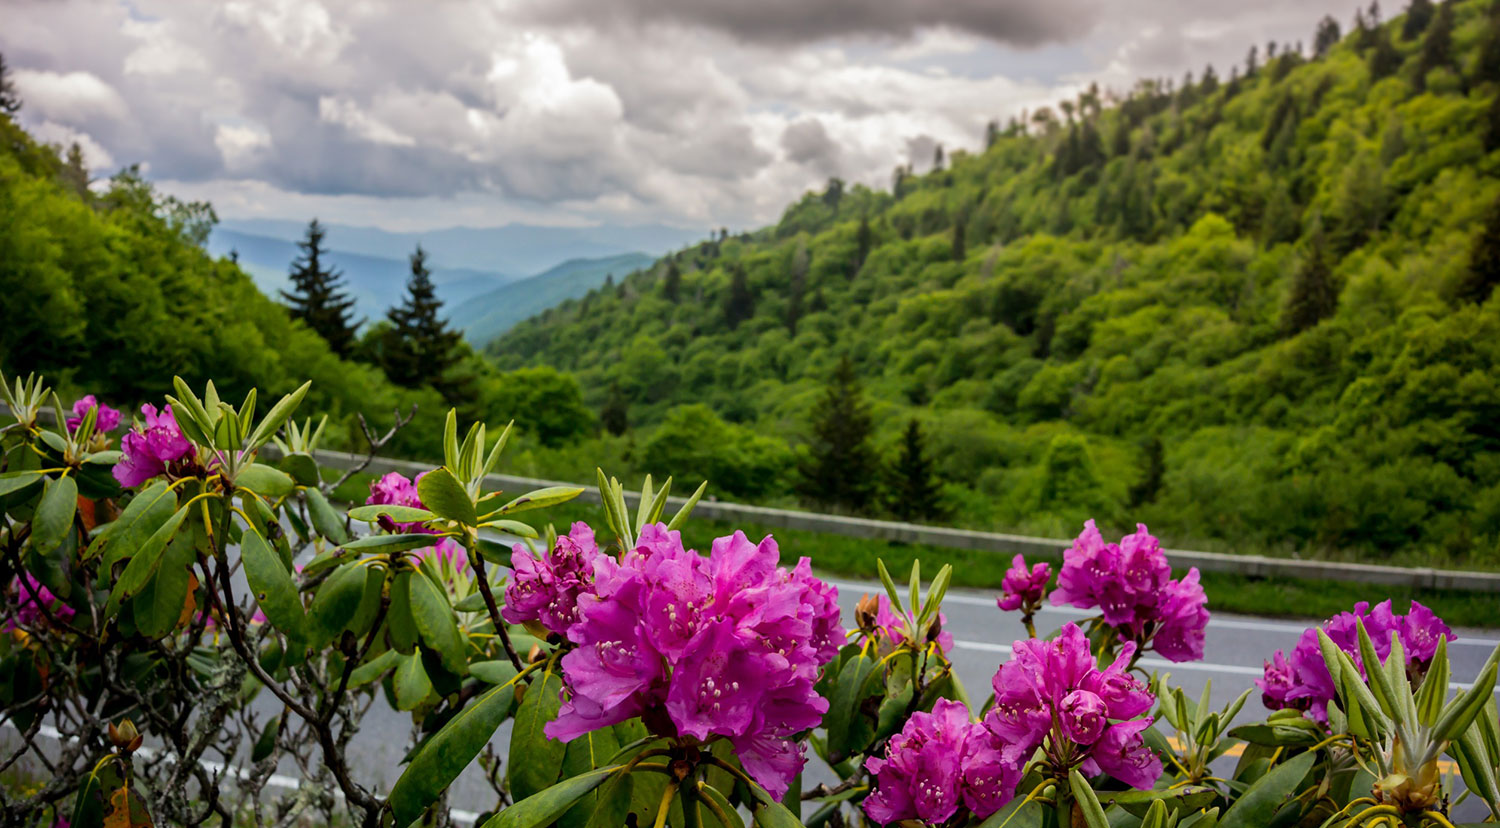 The Early Spring Flowers and Trees You Will Find in the Great Smoky Mountains in Tennessee